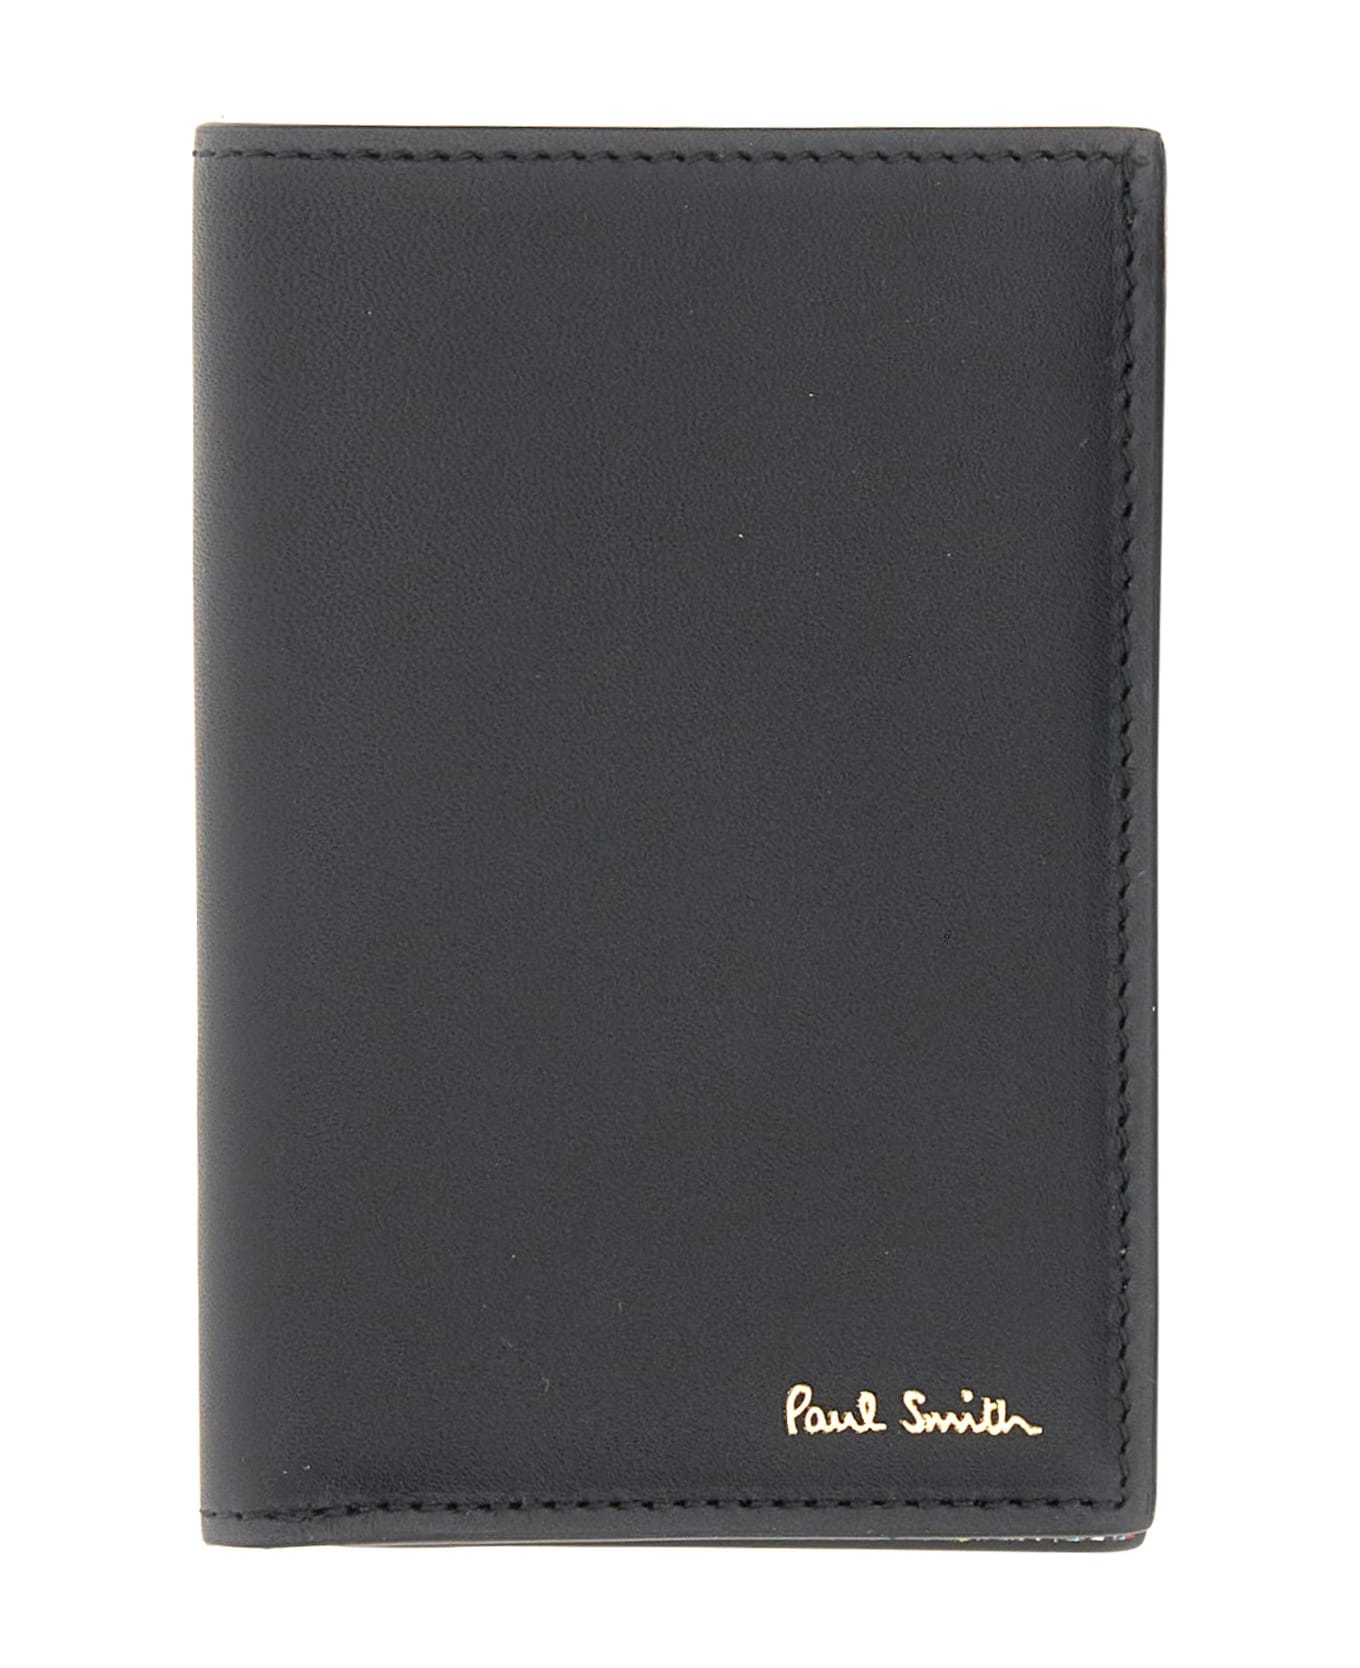 Paul Smith Leather Wallet - NERO